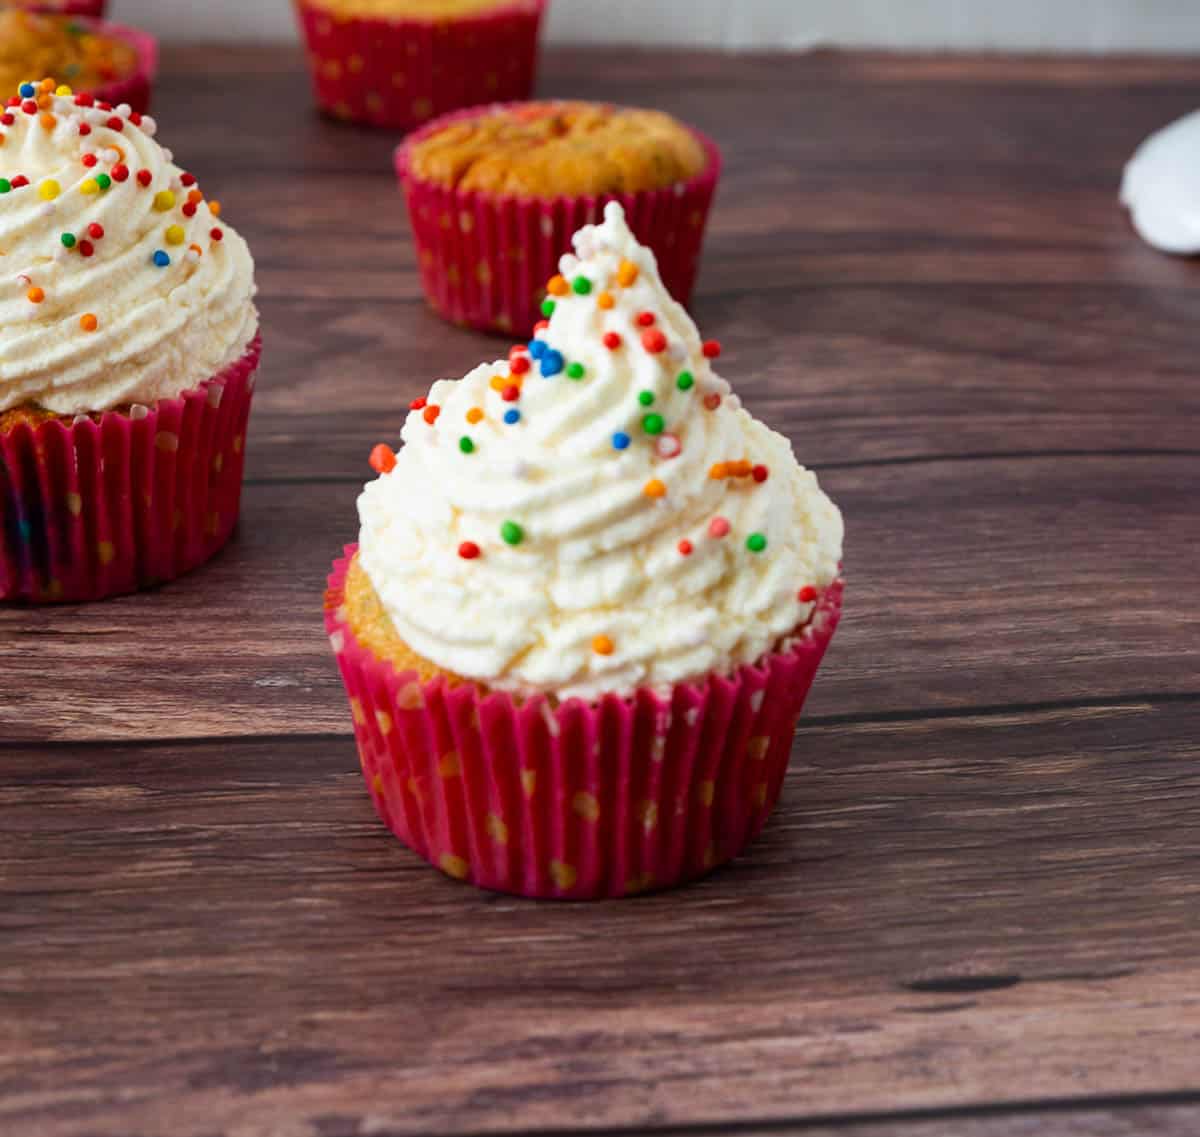 A funfetti cupcake on a wooden table.